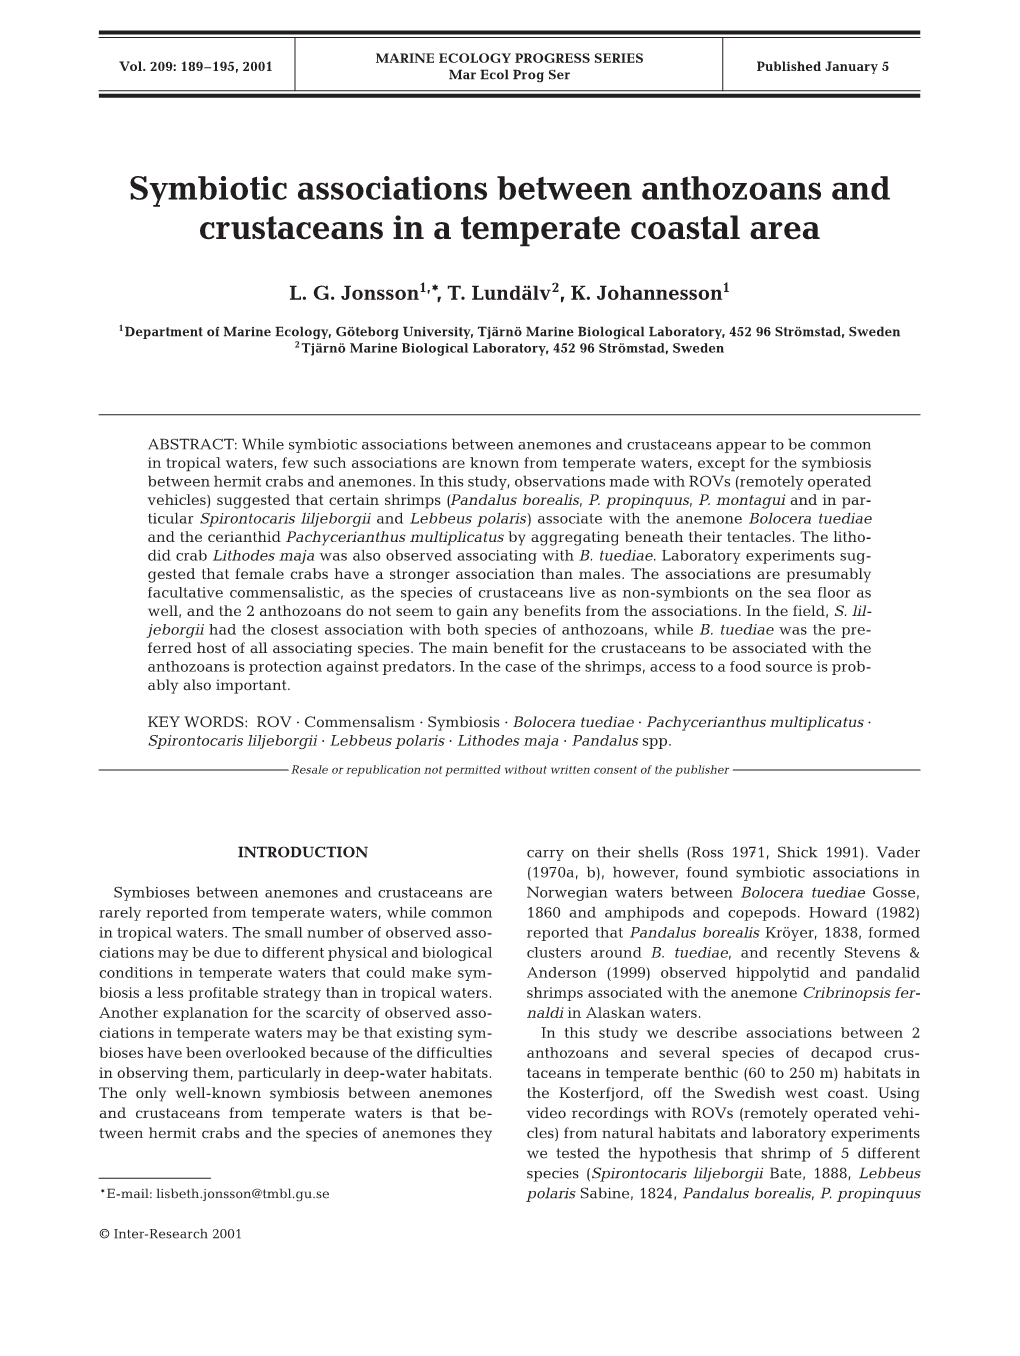 Symbiotic Associations Between Anthozoans and Crustaceans in a Temperate Coastal Area